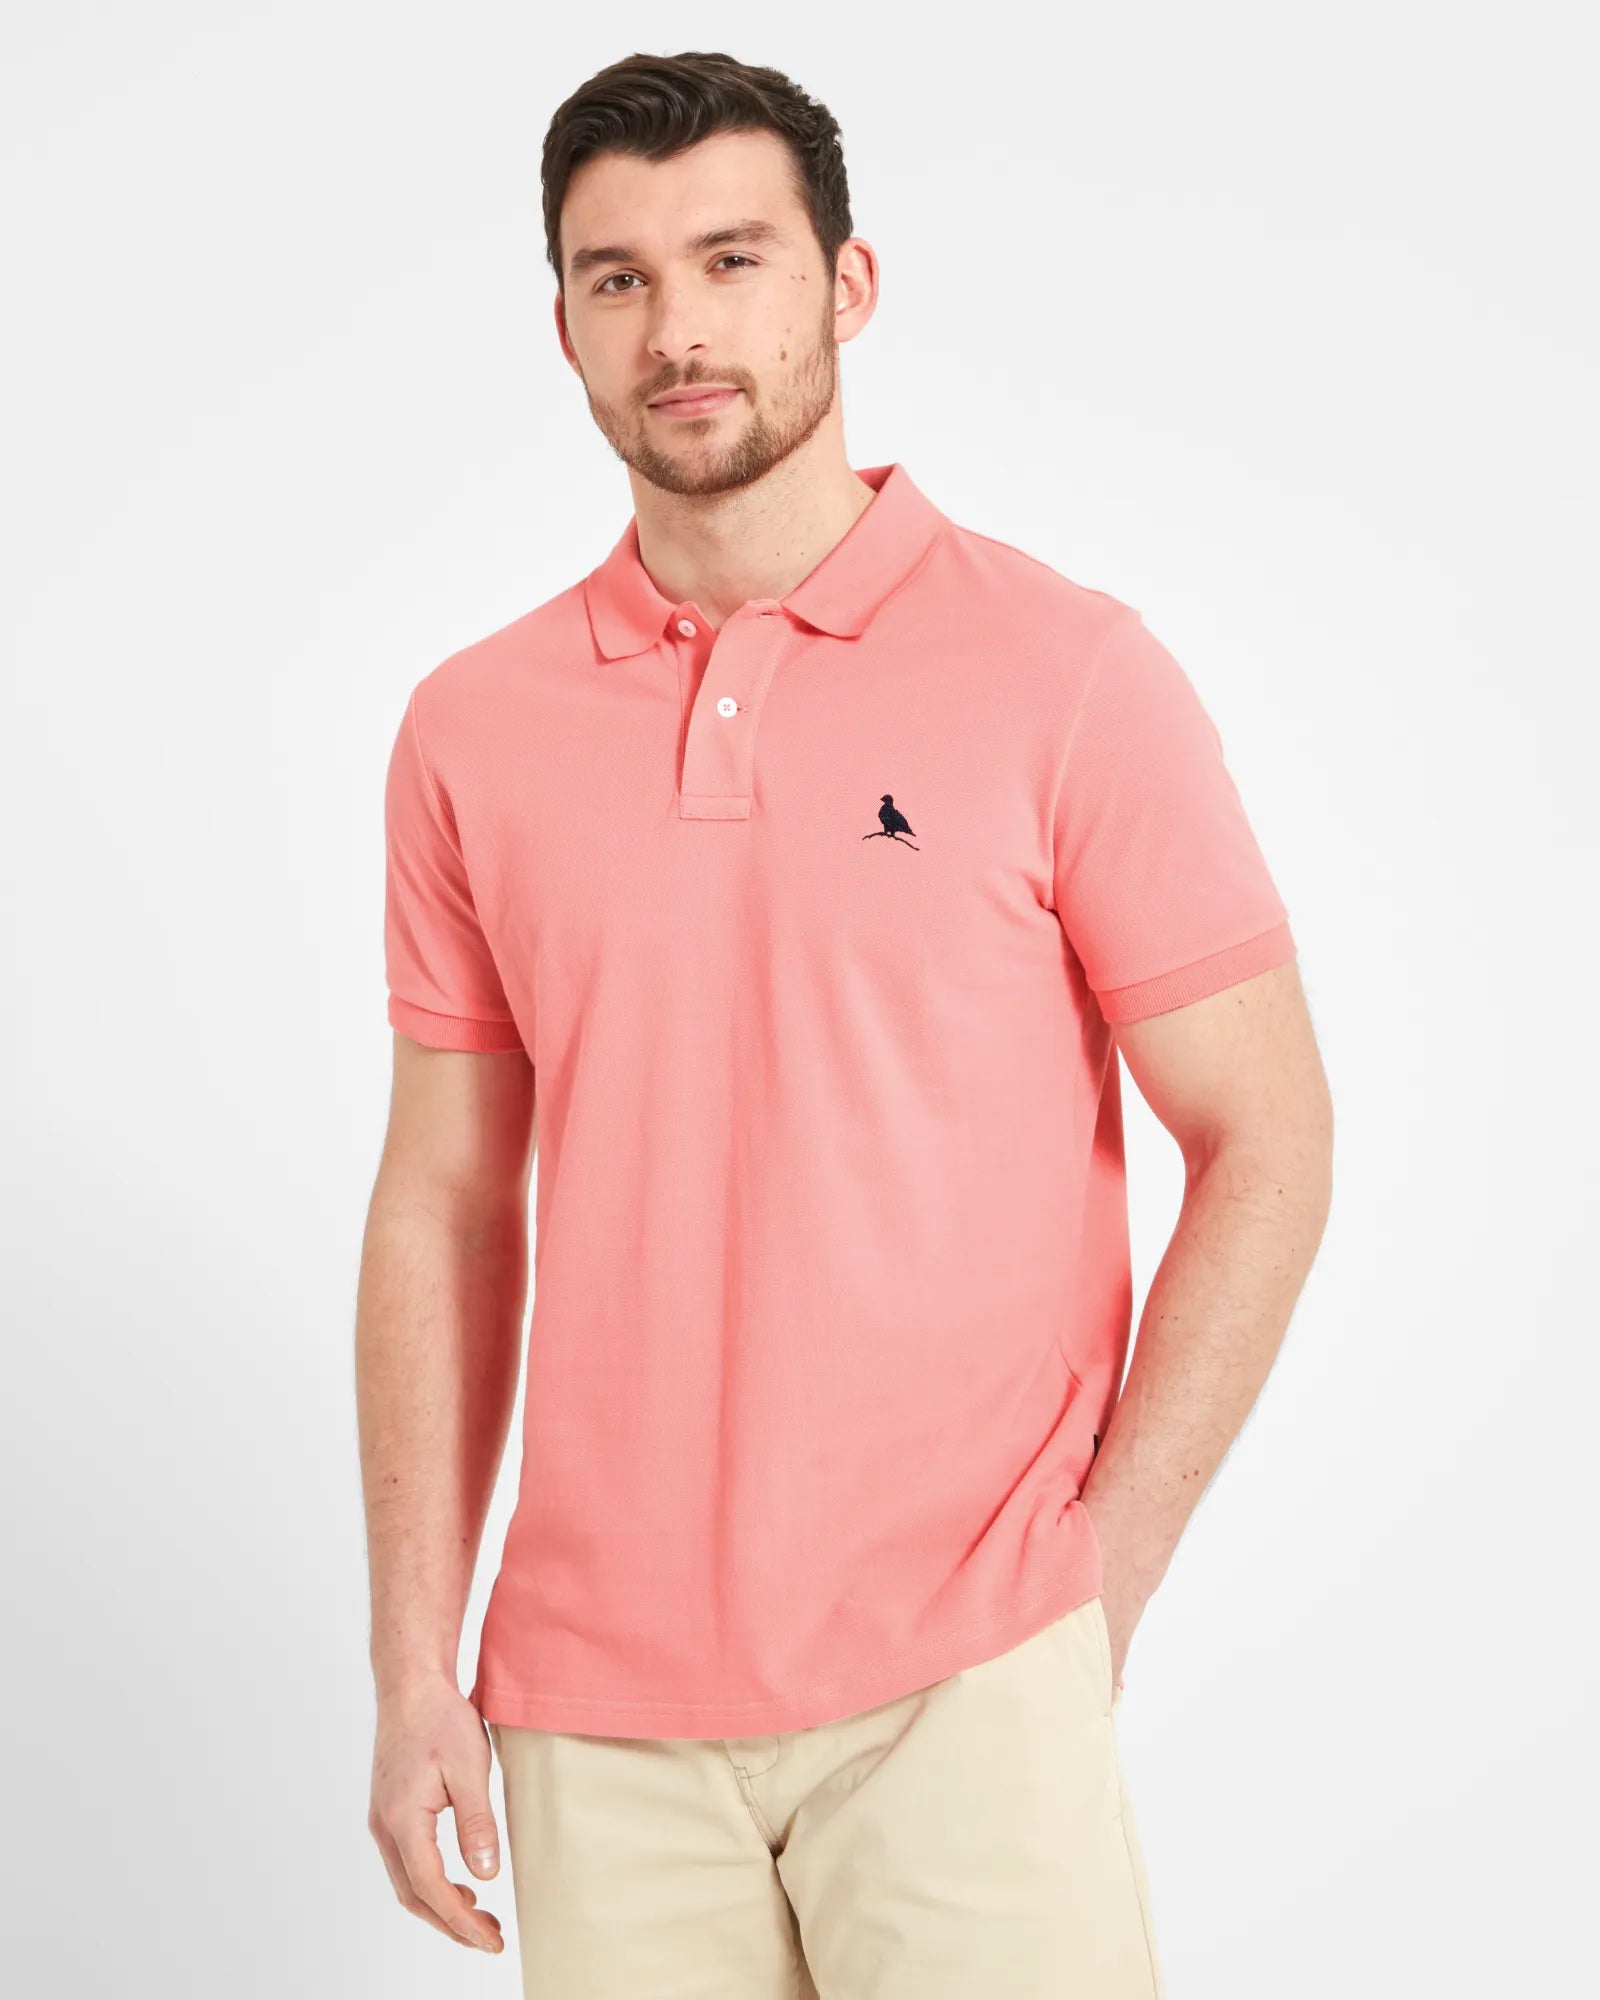 St Ives Tailored Polo - Flamingo